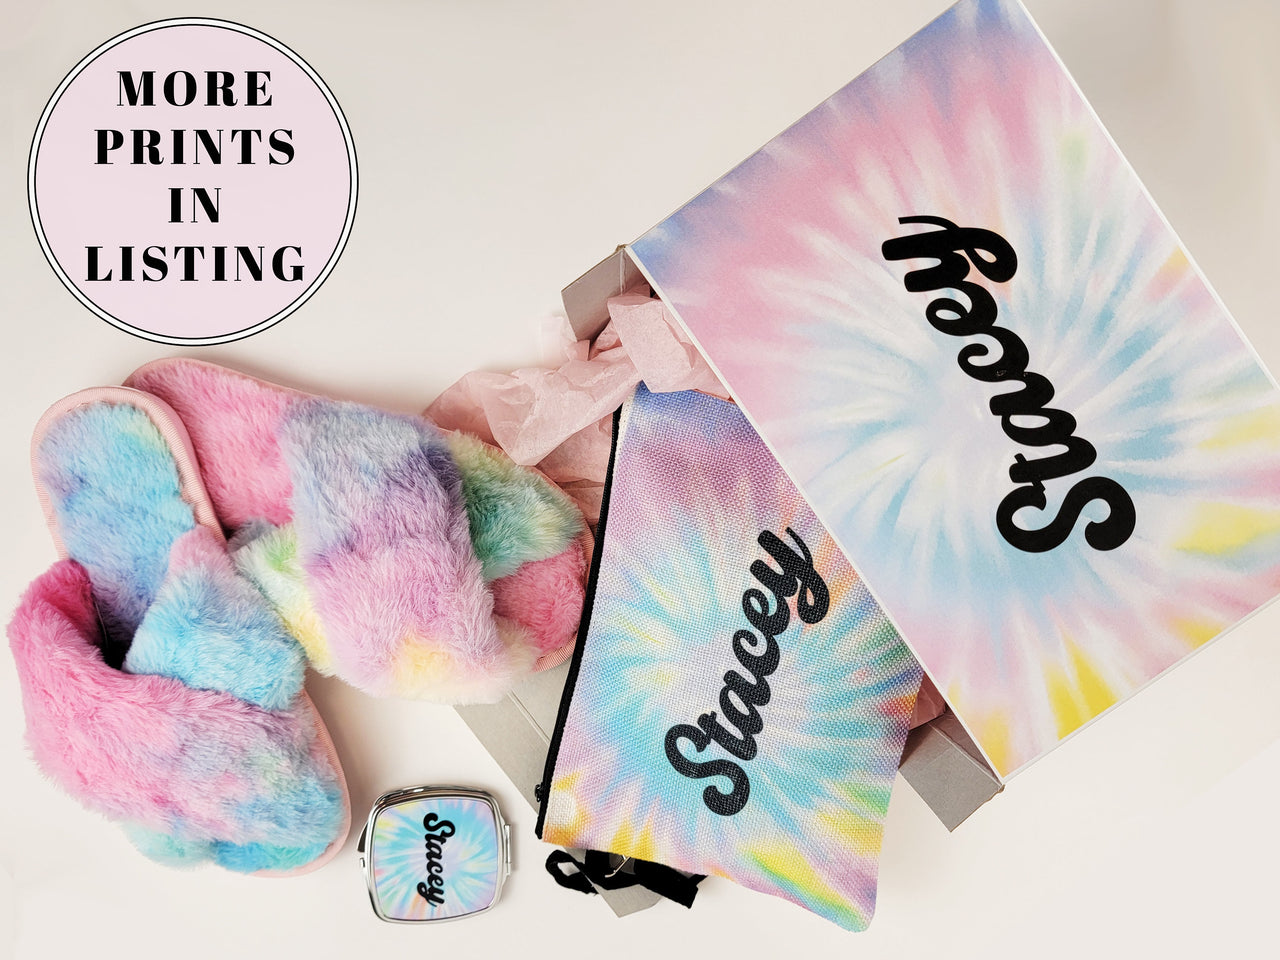 Gift Box Set | Bridesmaid Proposal | Personalized Bridesmaids Gifts | Makeup Bag Zipper Pouch Compact Mirror Pink Tie Dye Rave Hippie Gifts